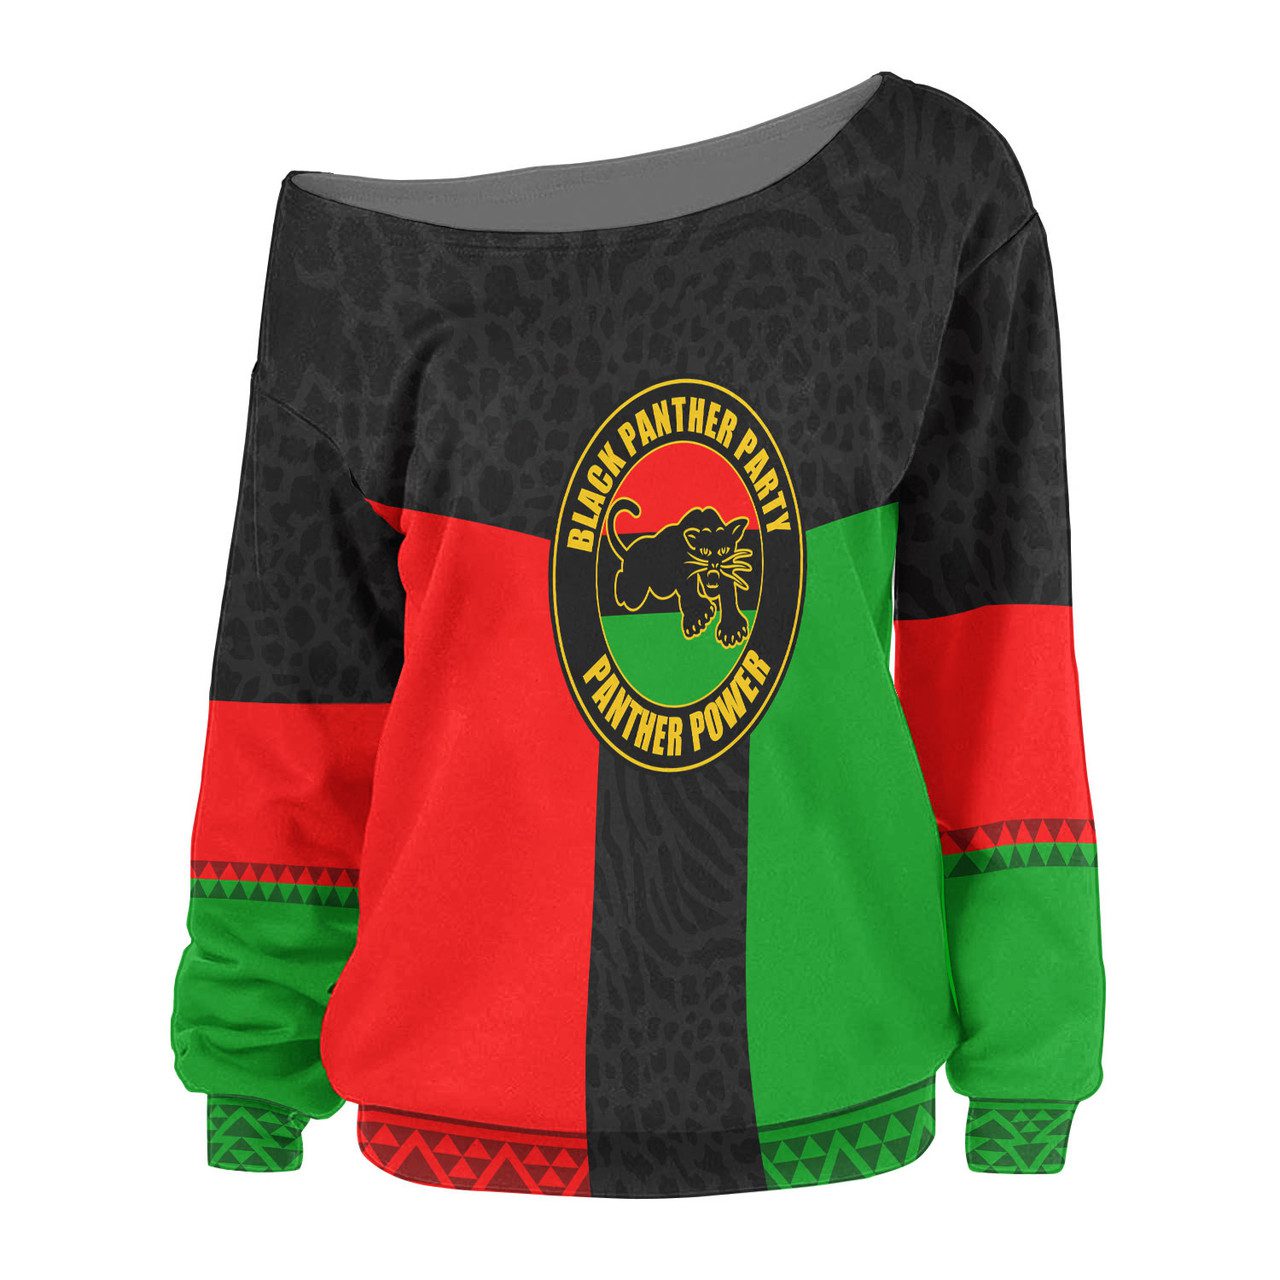 African Women Off Shoulder Sweater – Africa African Flag With Panther Power